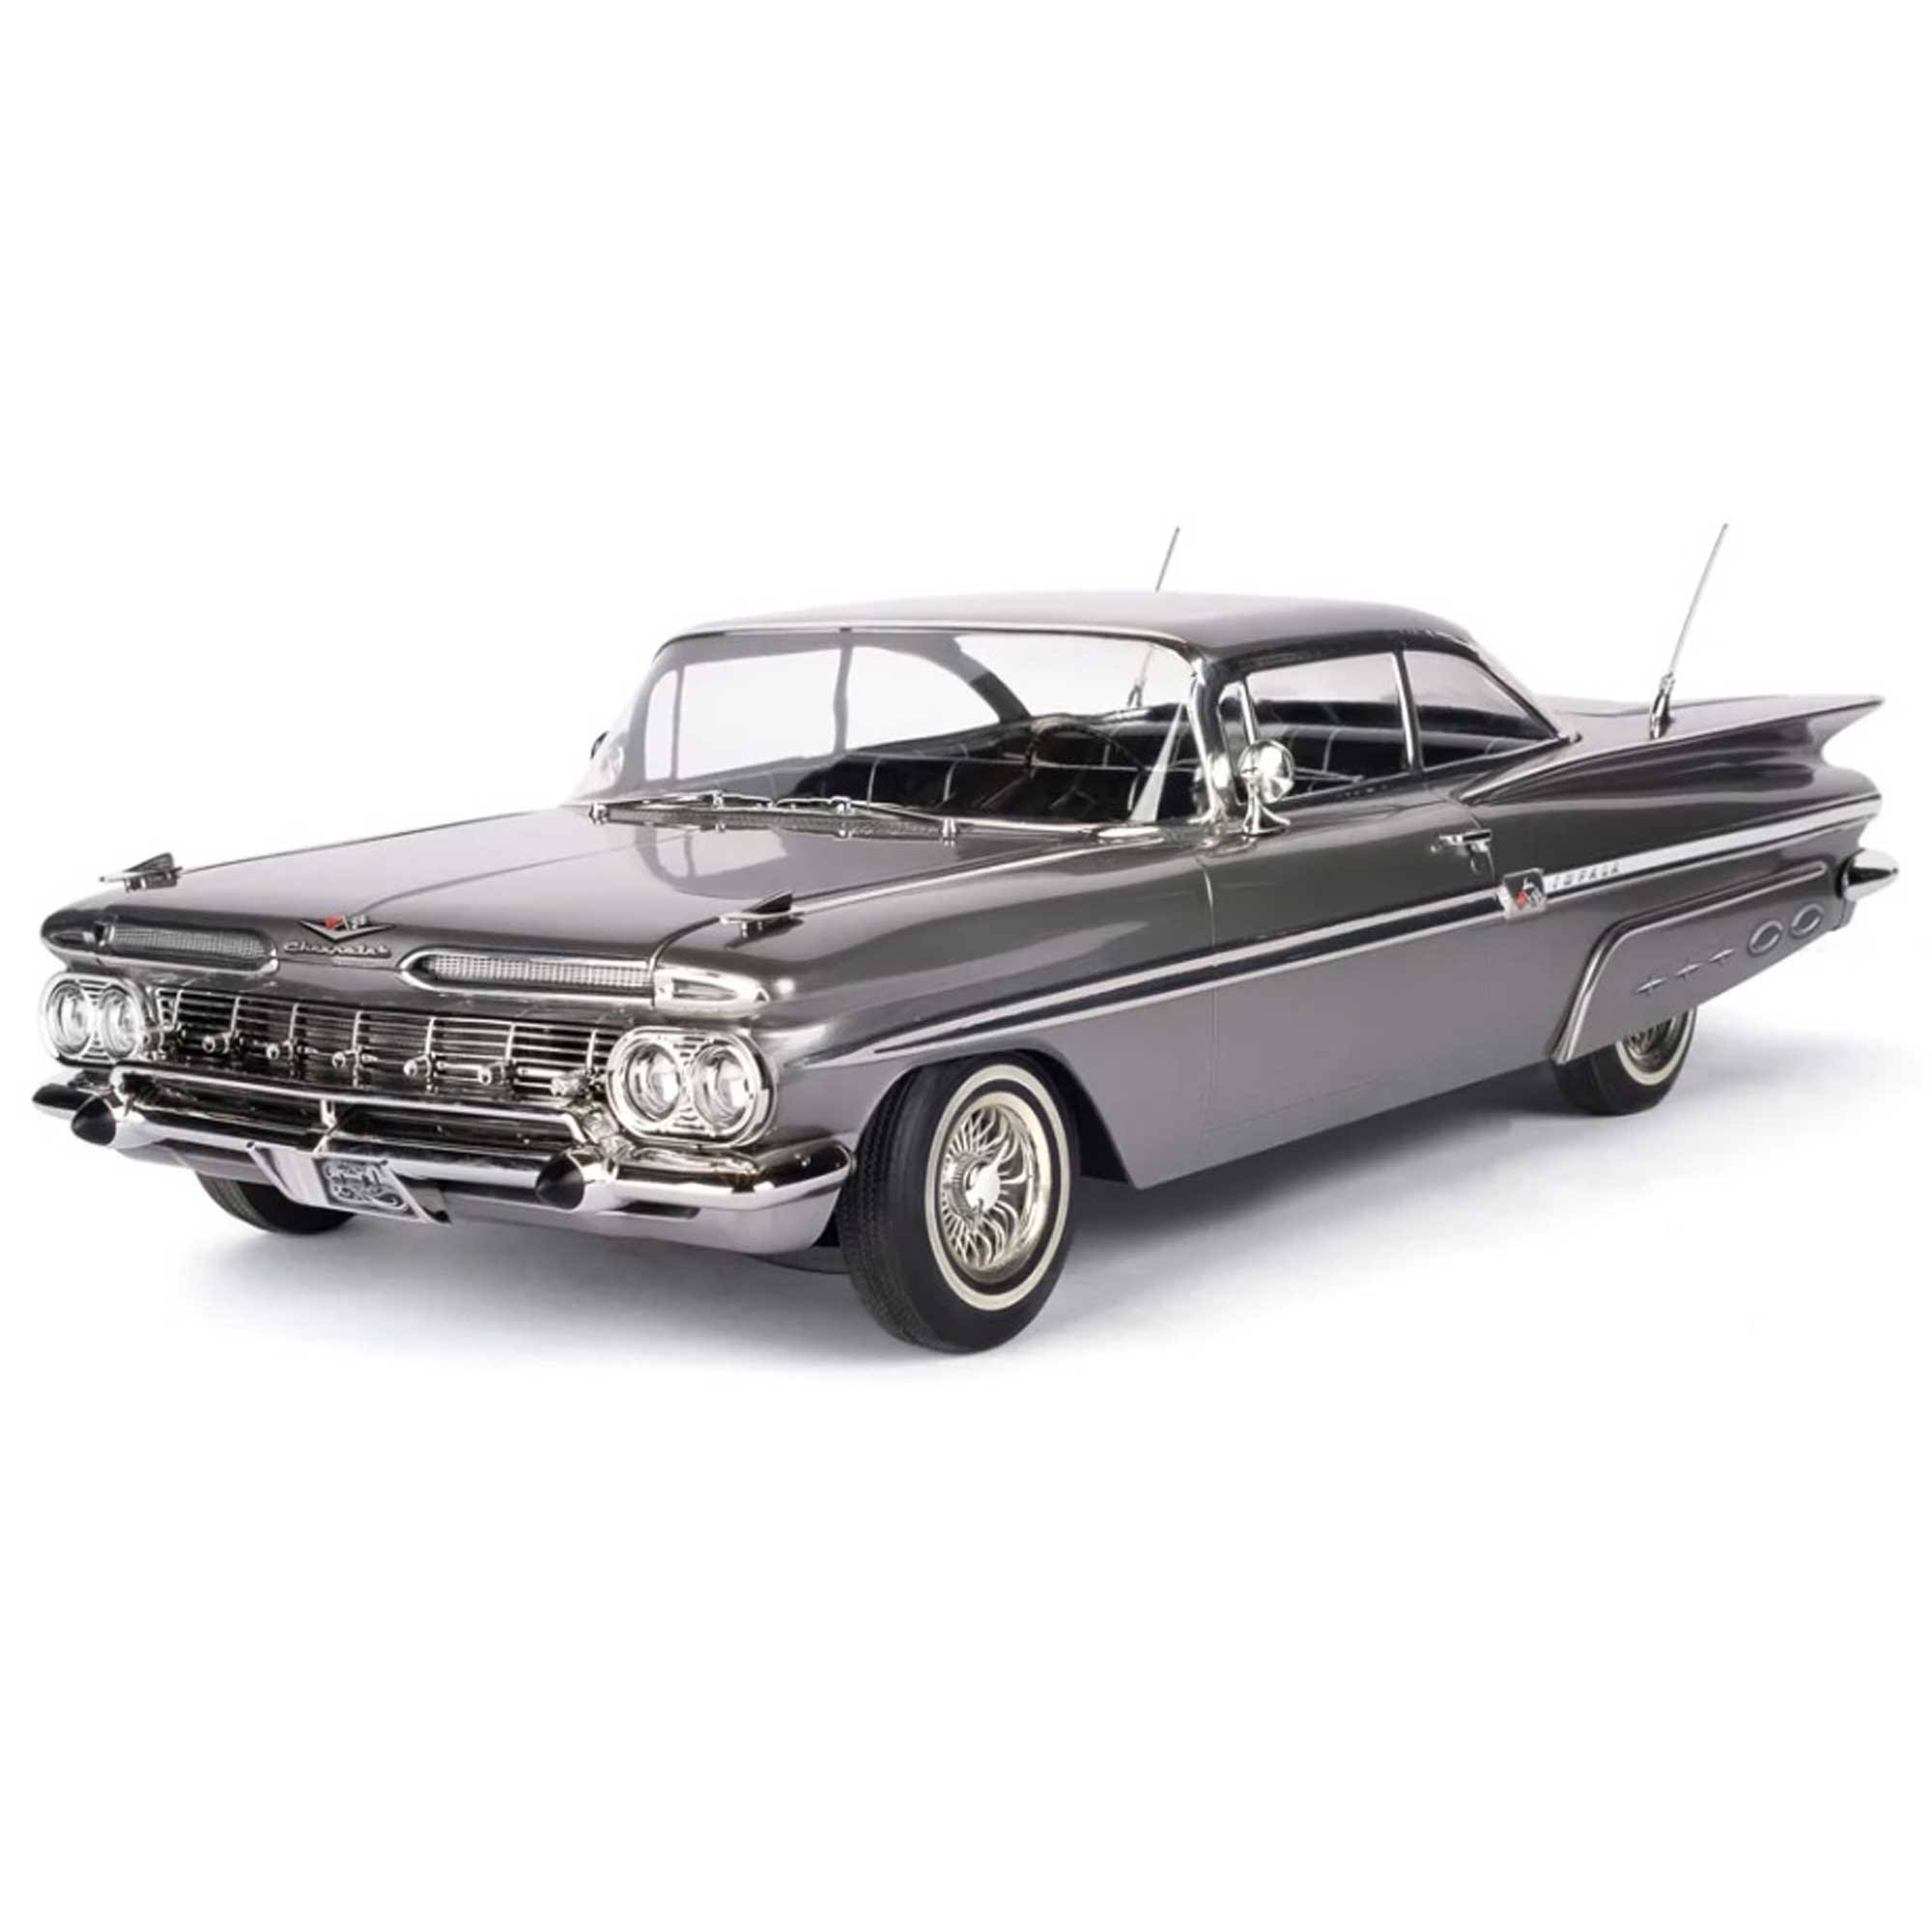 REDCAT RACING RER15391: Redcat Racing FiftyNine 1:10 Scale 1959 Chevrolet Impala Hopping Lowrider RC Cars